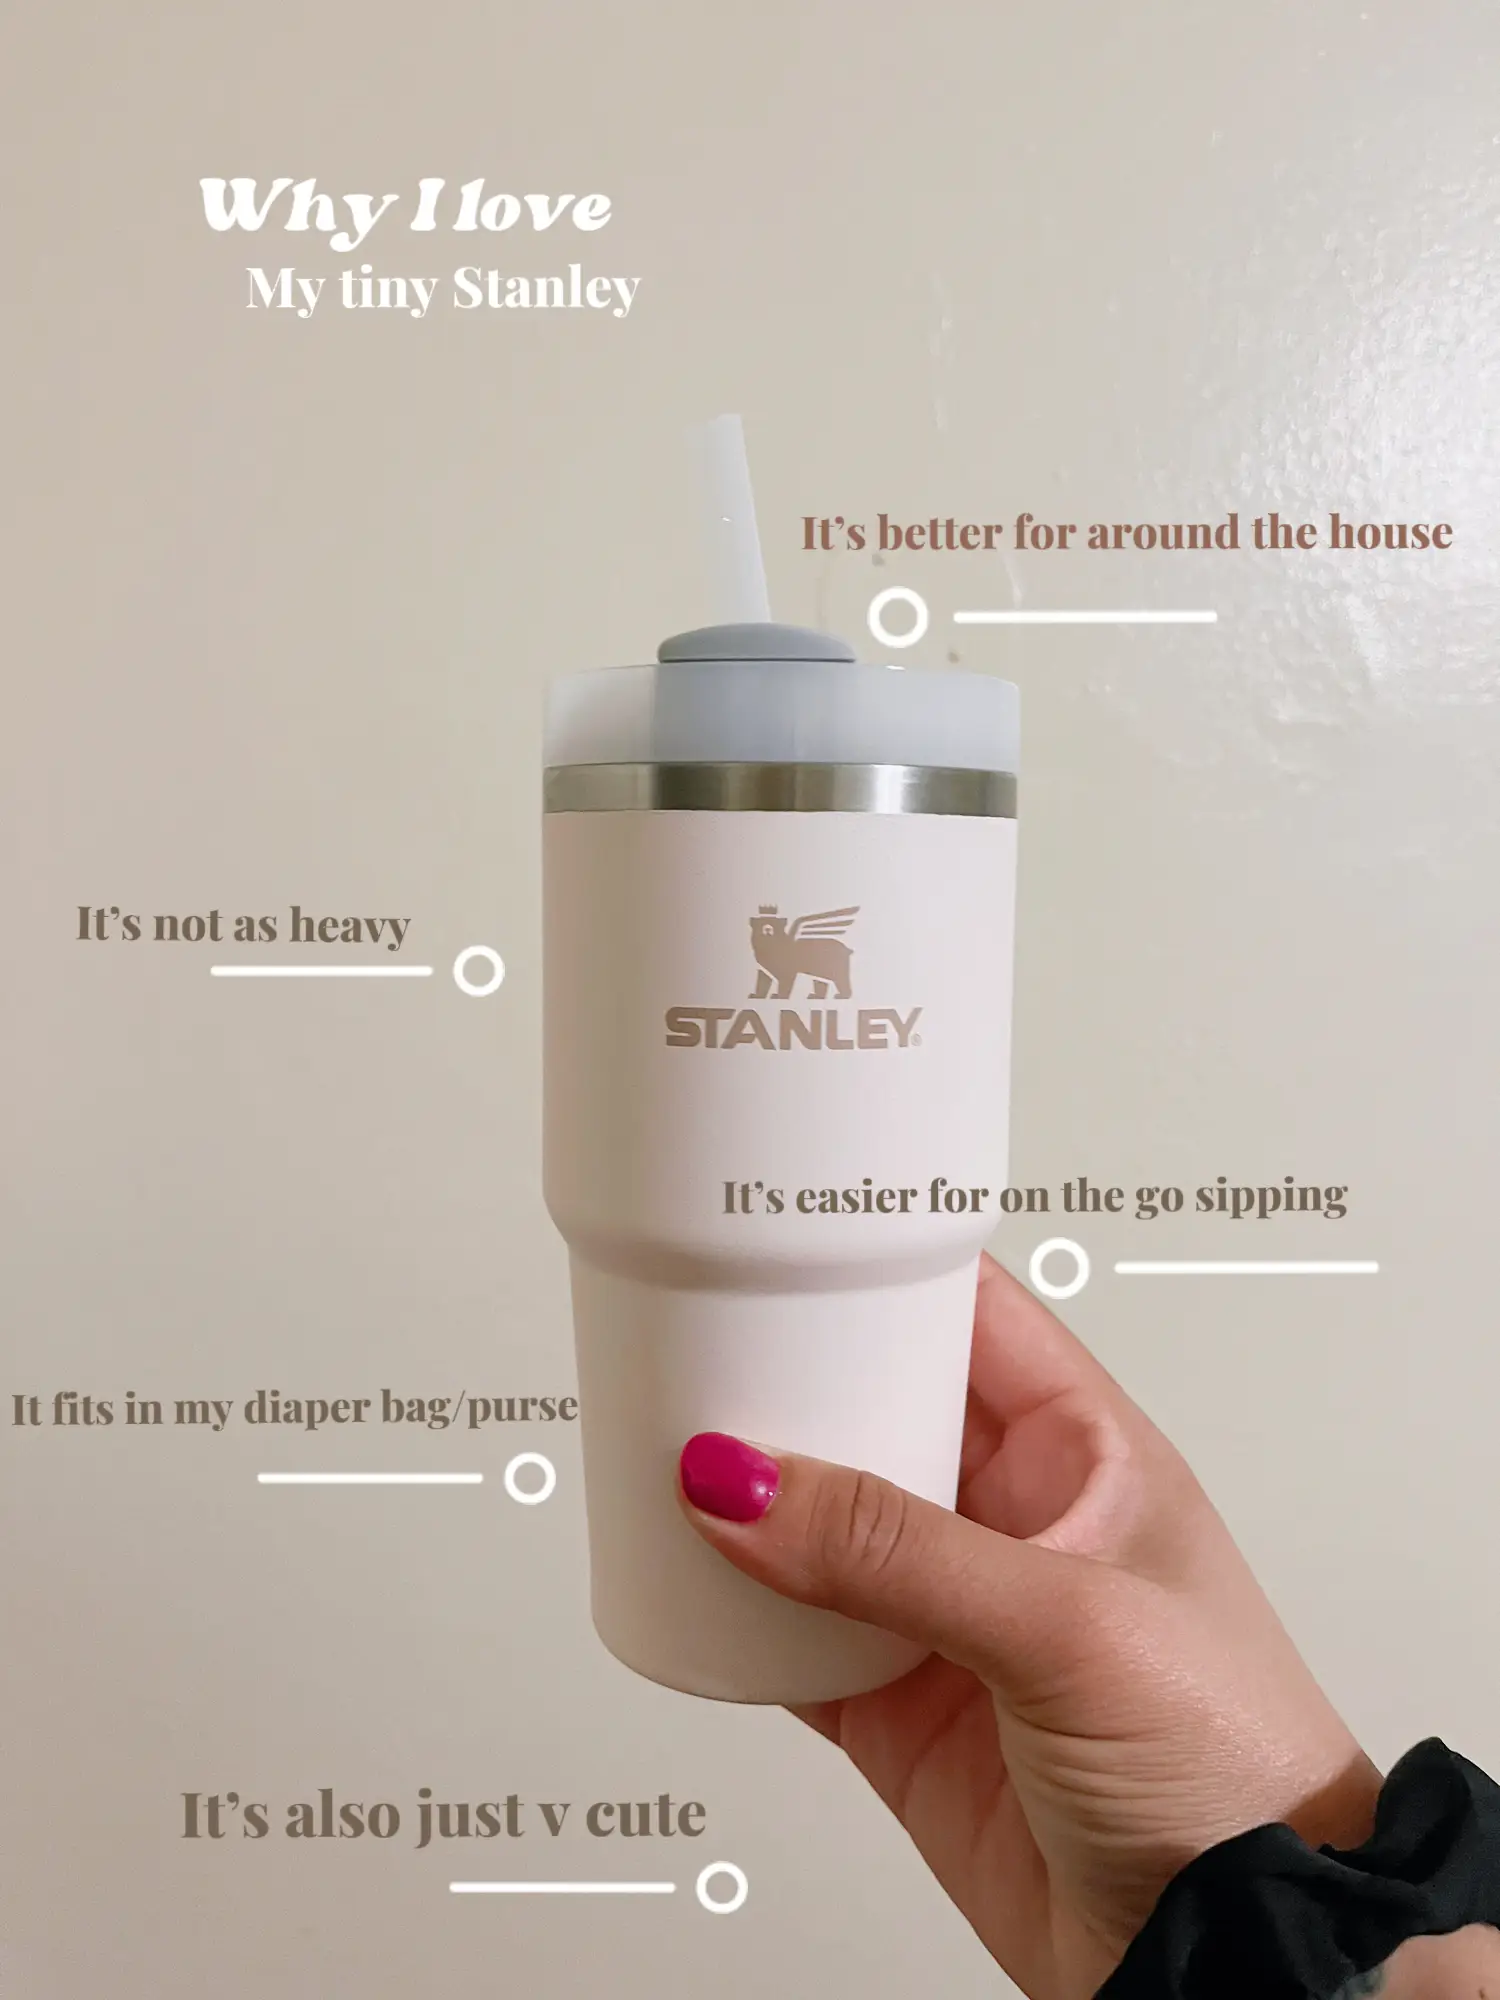 My tiny Stanley, Gallery posted by kendralala